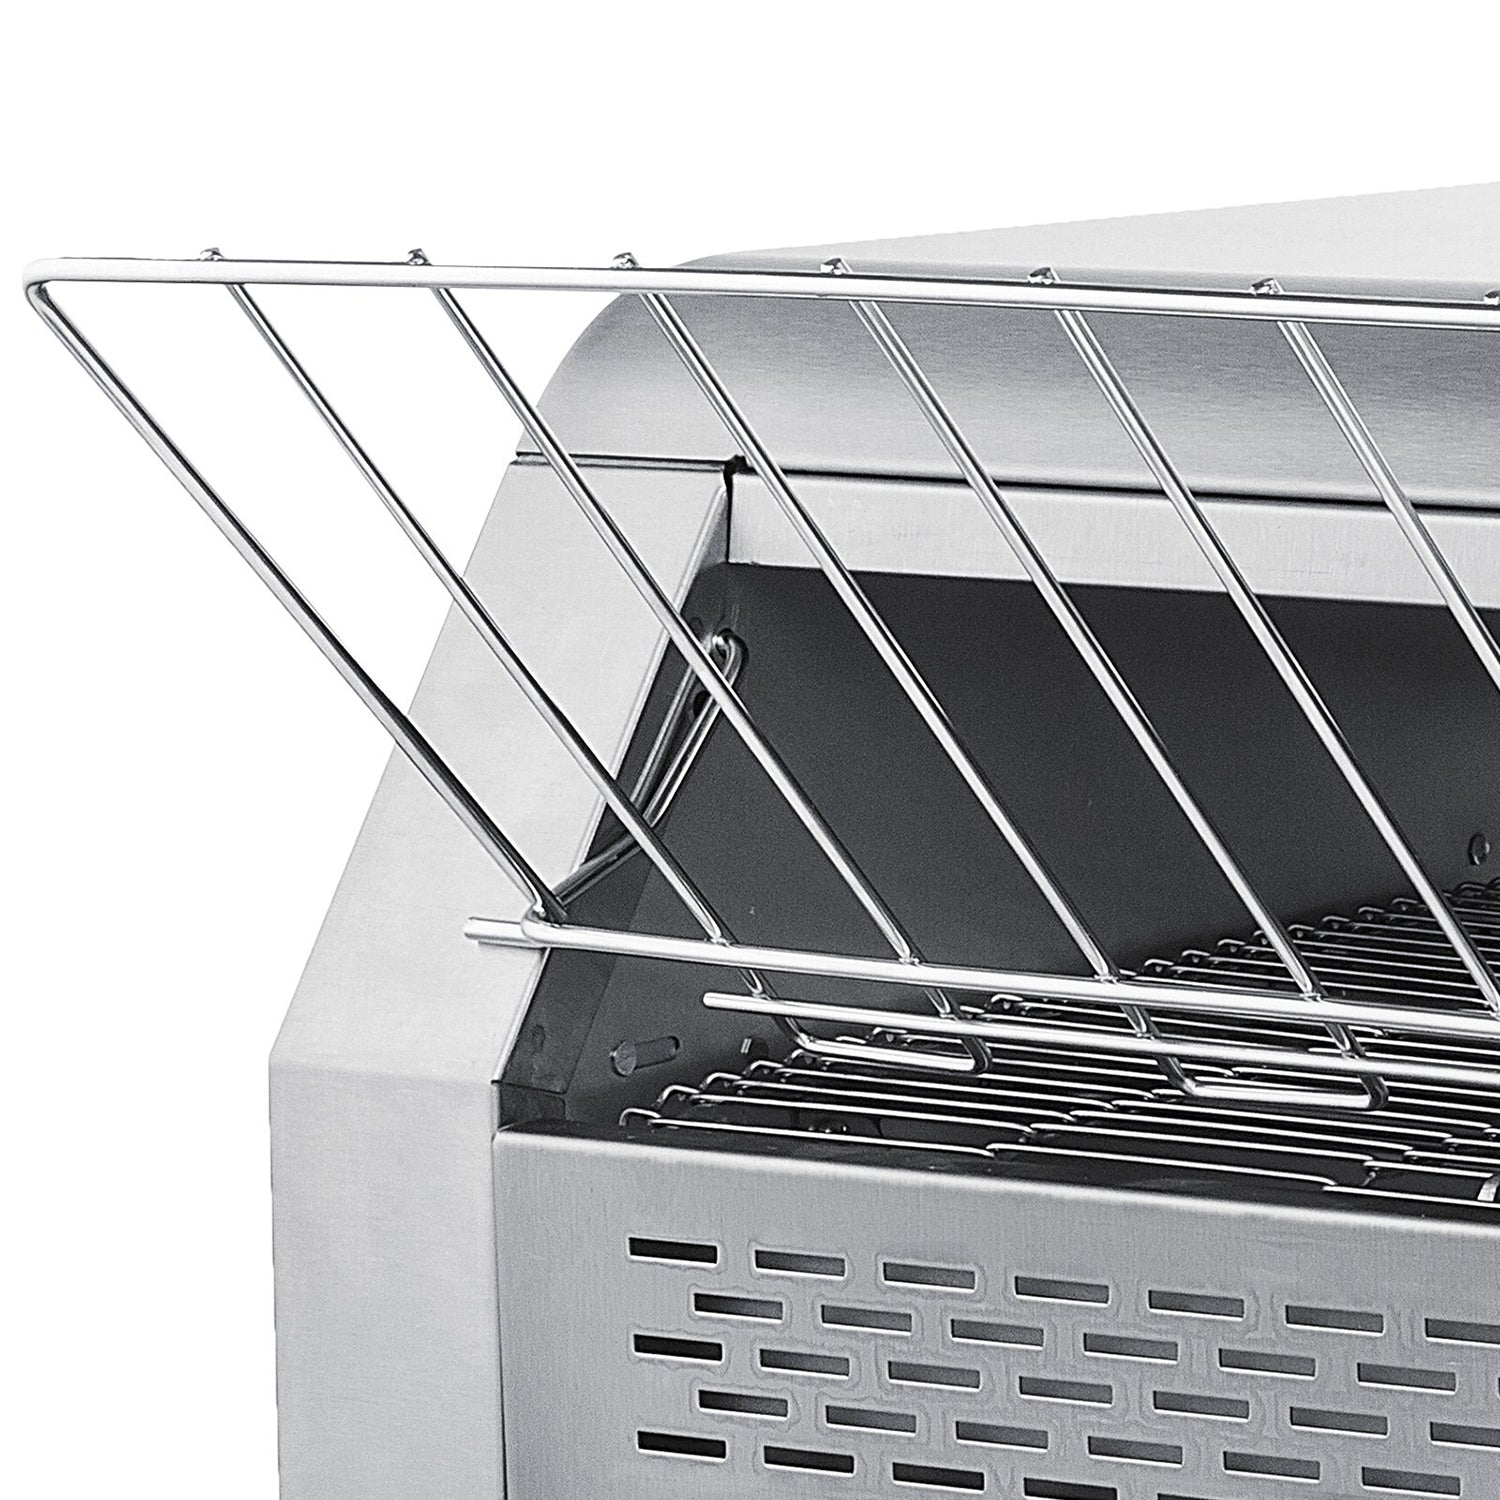 ALD-150H Commercial Conveyor Toaster | Professional Heavy Duty | Stainless Steel | 150PCs per Hour